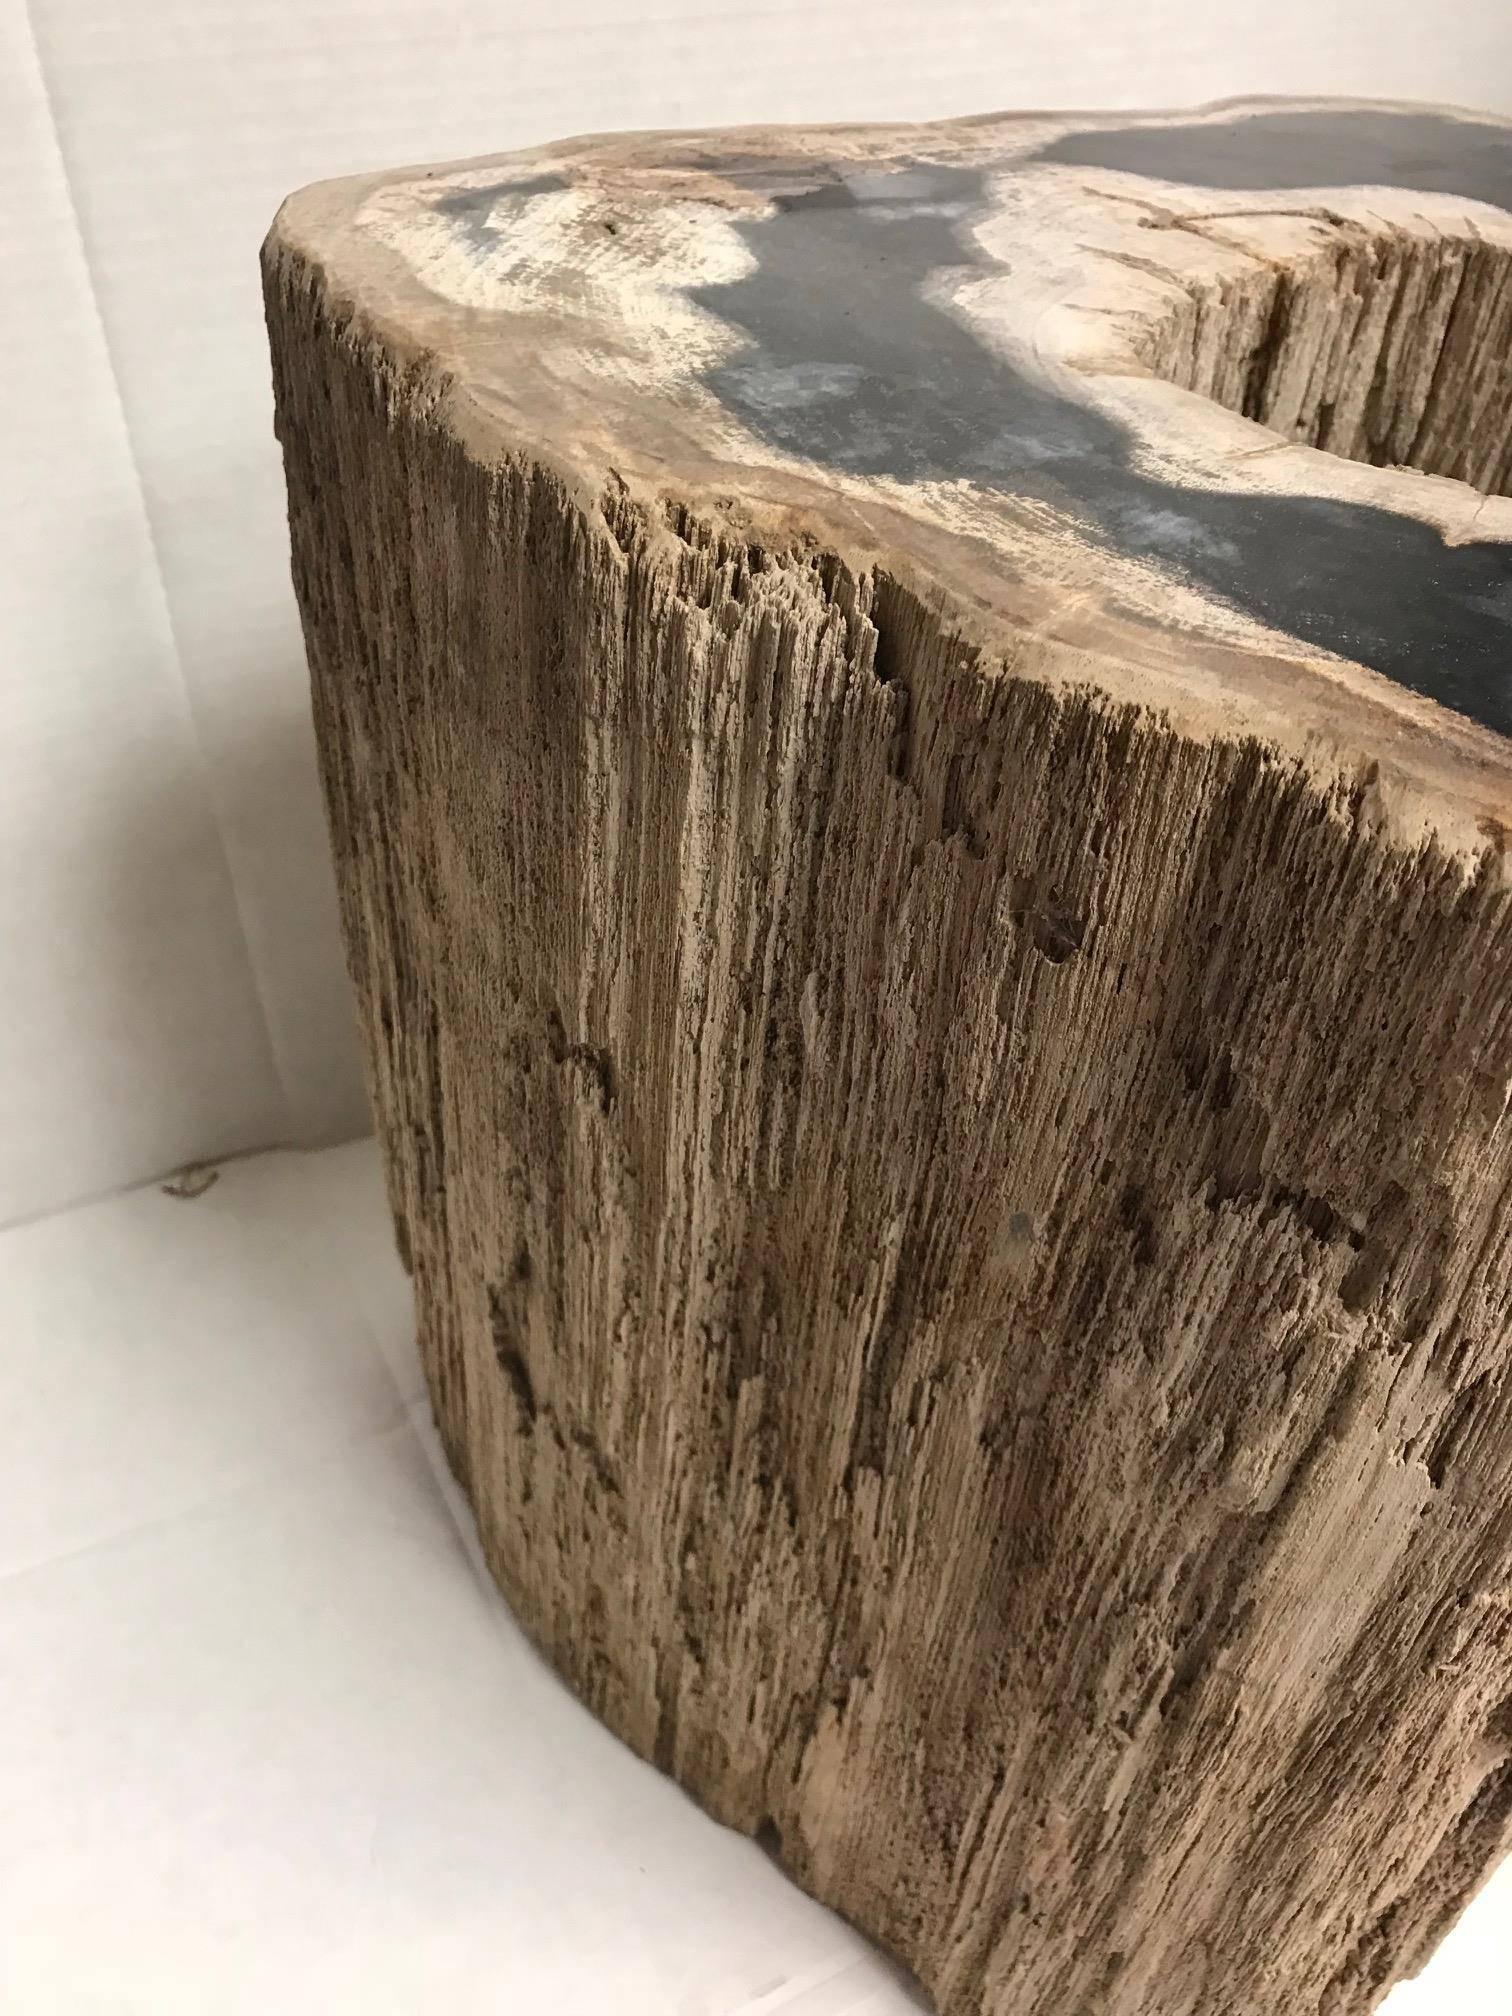 Organic Modern Large Petrified Wood Side Table with Hole All the Way through